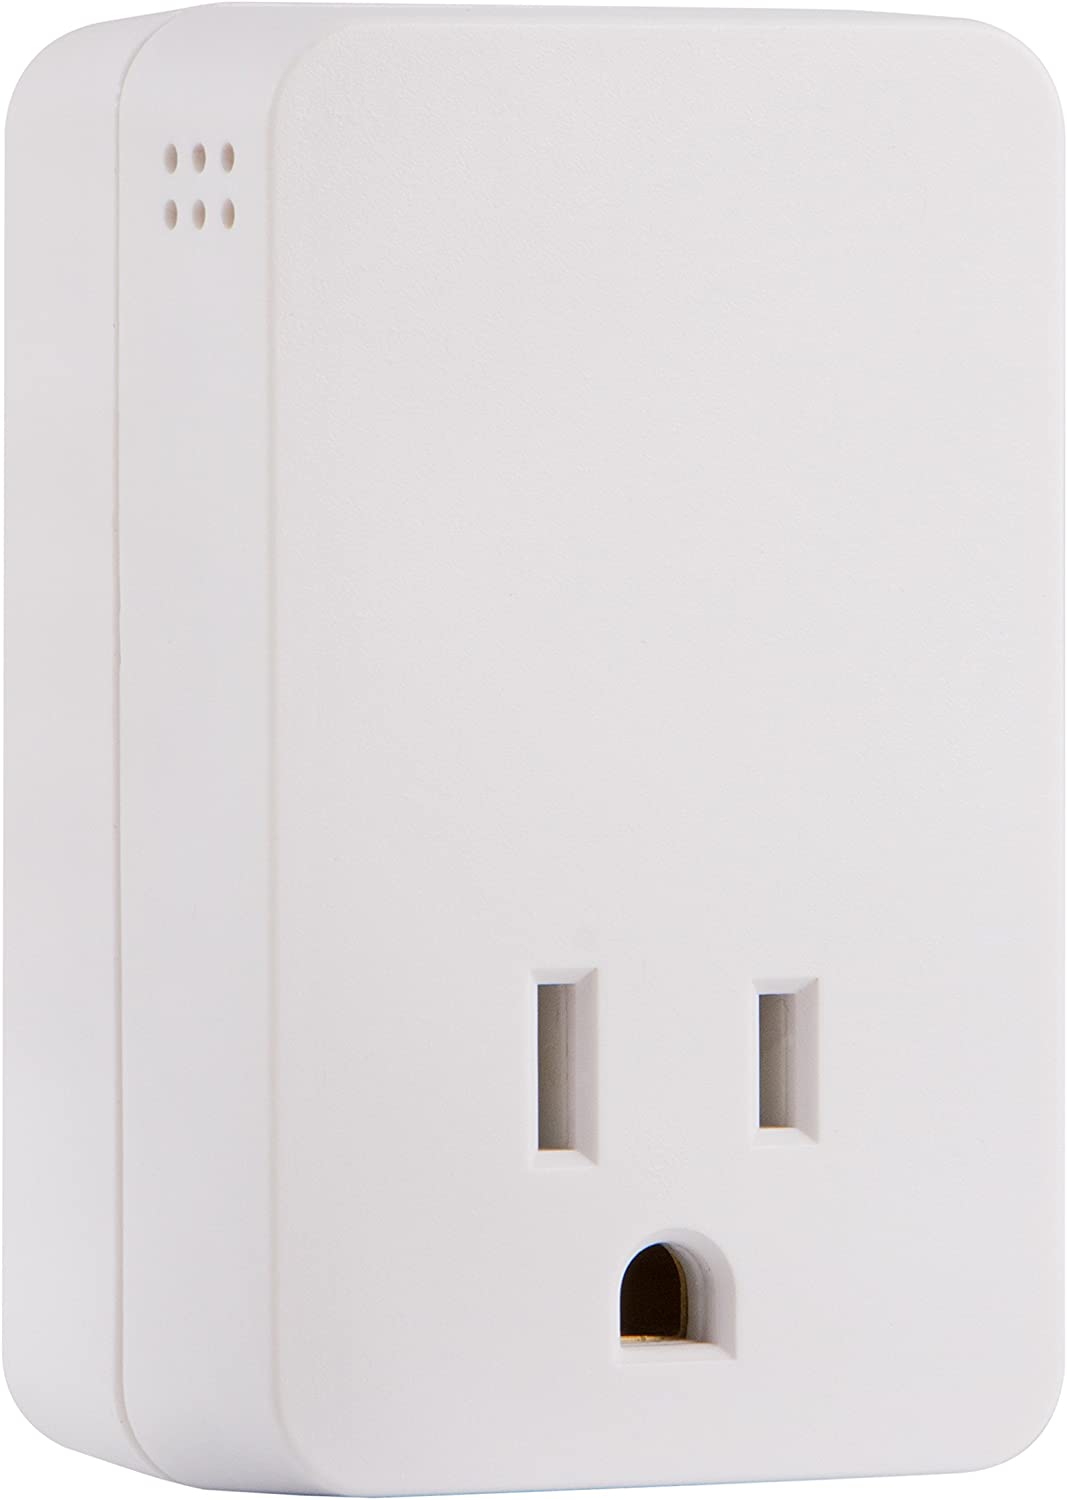 GE UltraPro Surge Protector Plug with Alarm, Outlet Extender, Plug Adapter, Appliance, Refrigerator, End of Service, 1080 Joules, Warranty, UL Listed, White, 38124